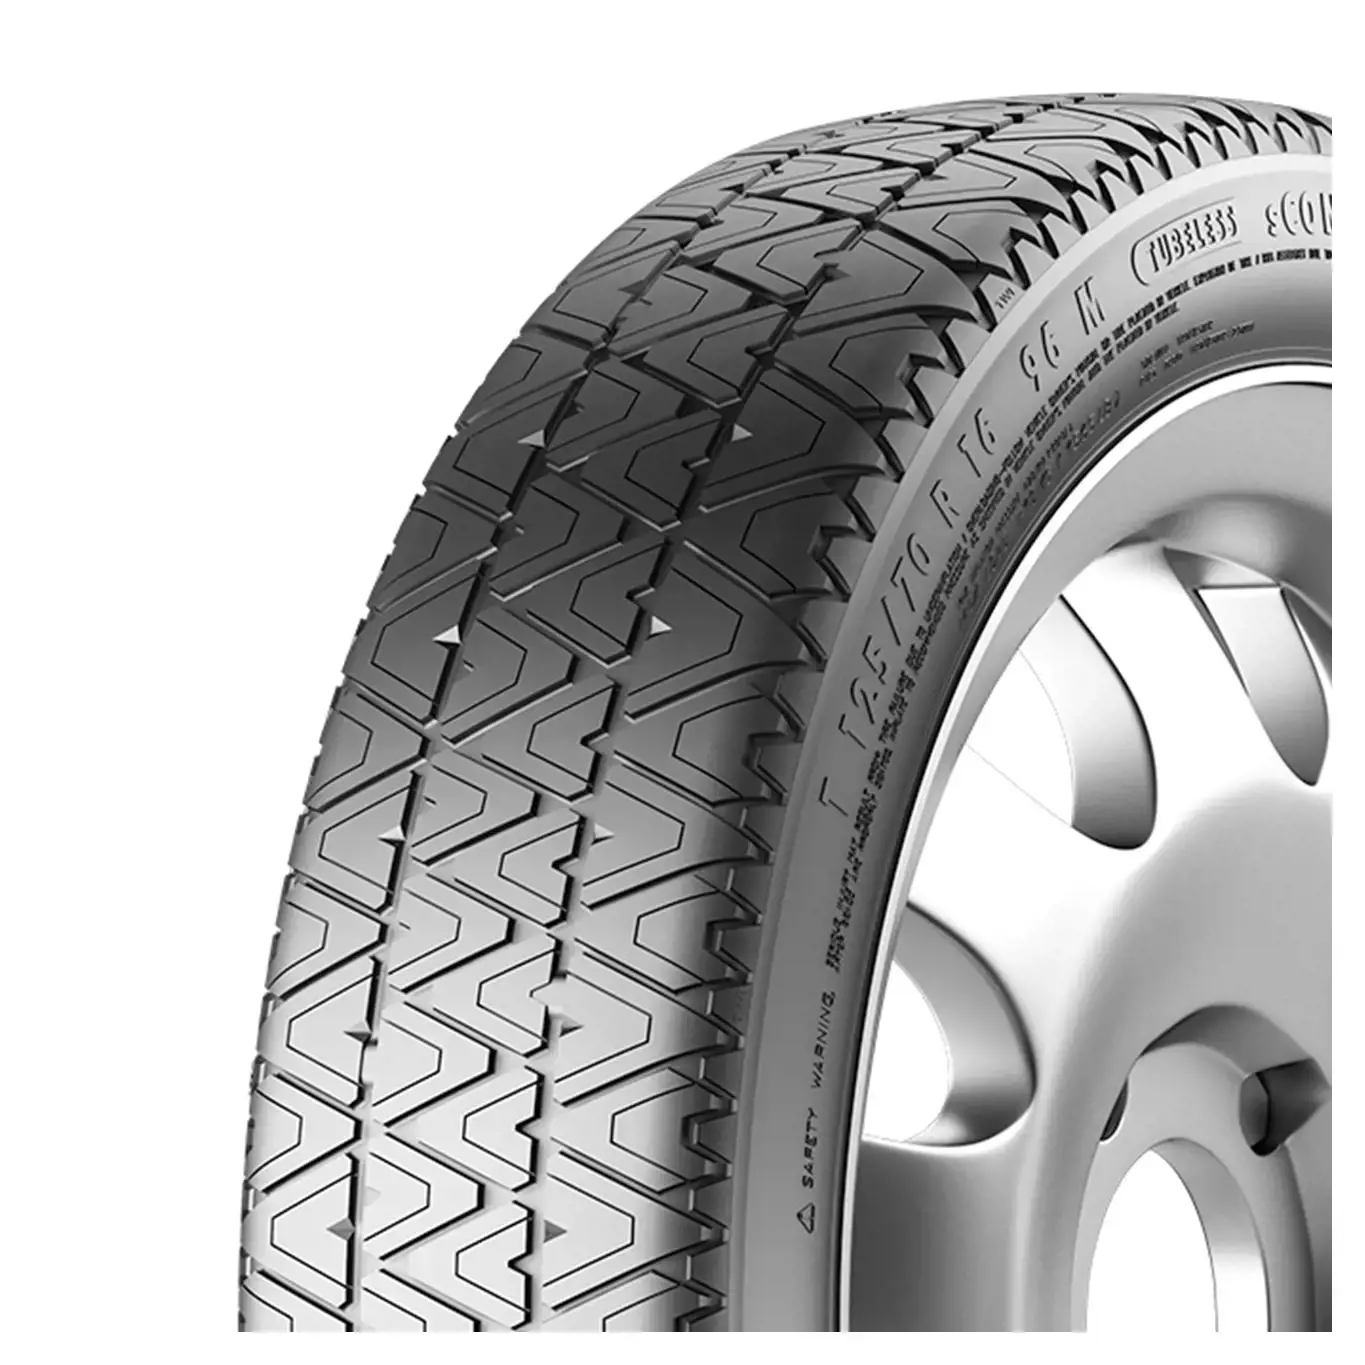 T135/80 R17 102M sContact